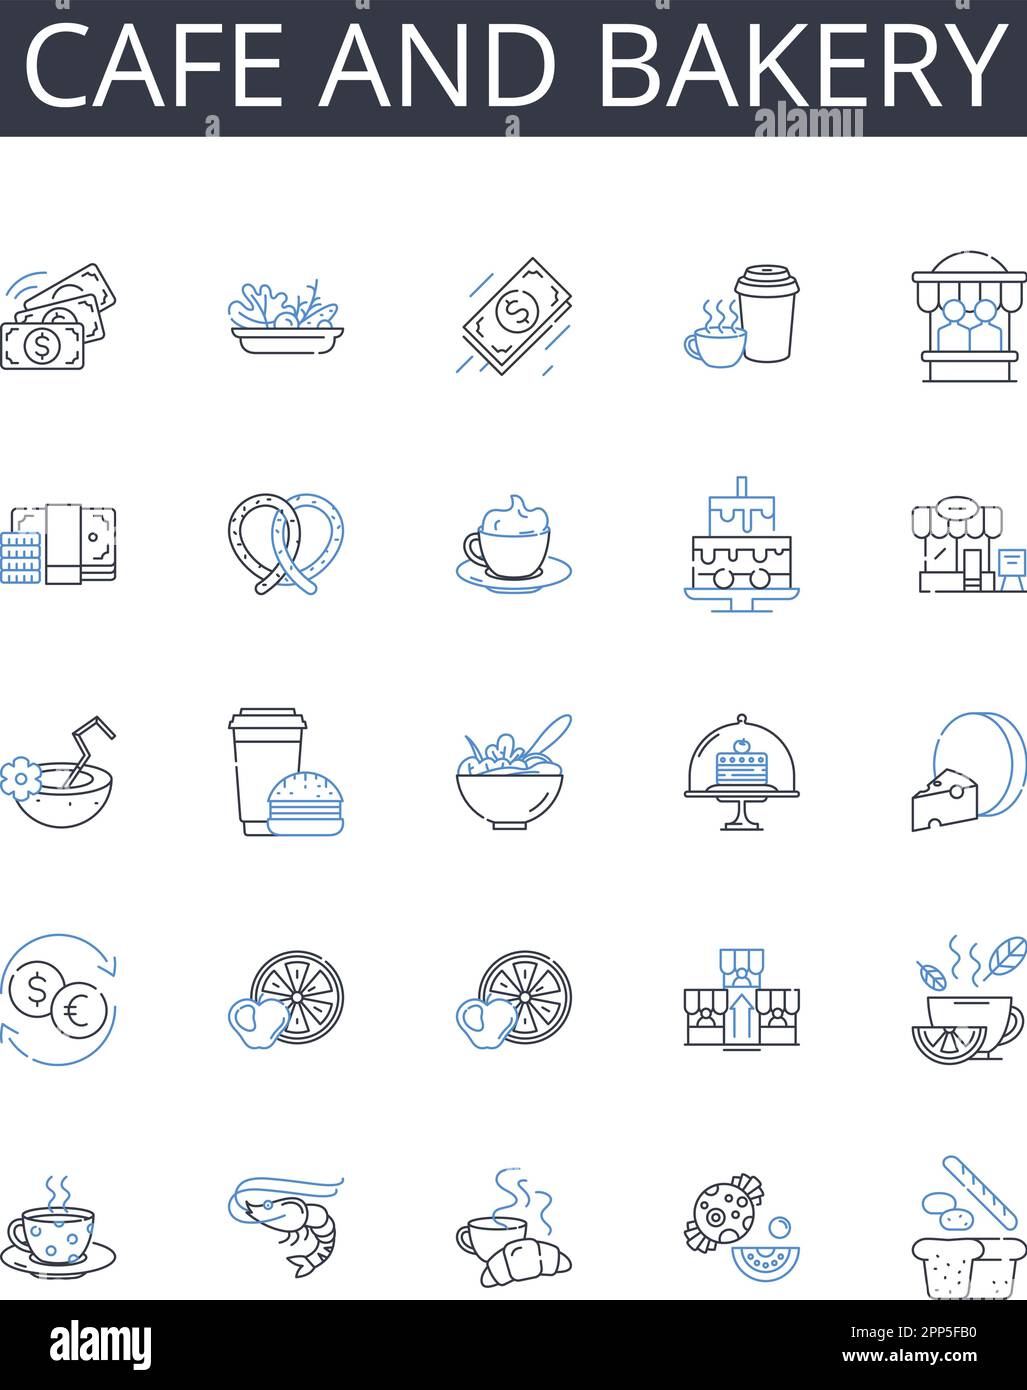 Cafe and bakery line icons collection. Misconduct, Ethics, Whistleblowing, Fraud, Investigation, Complaint, Suspicion vector and linear illustration Stock Vector